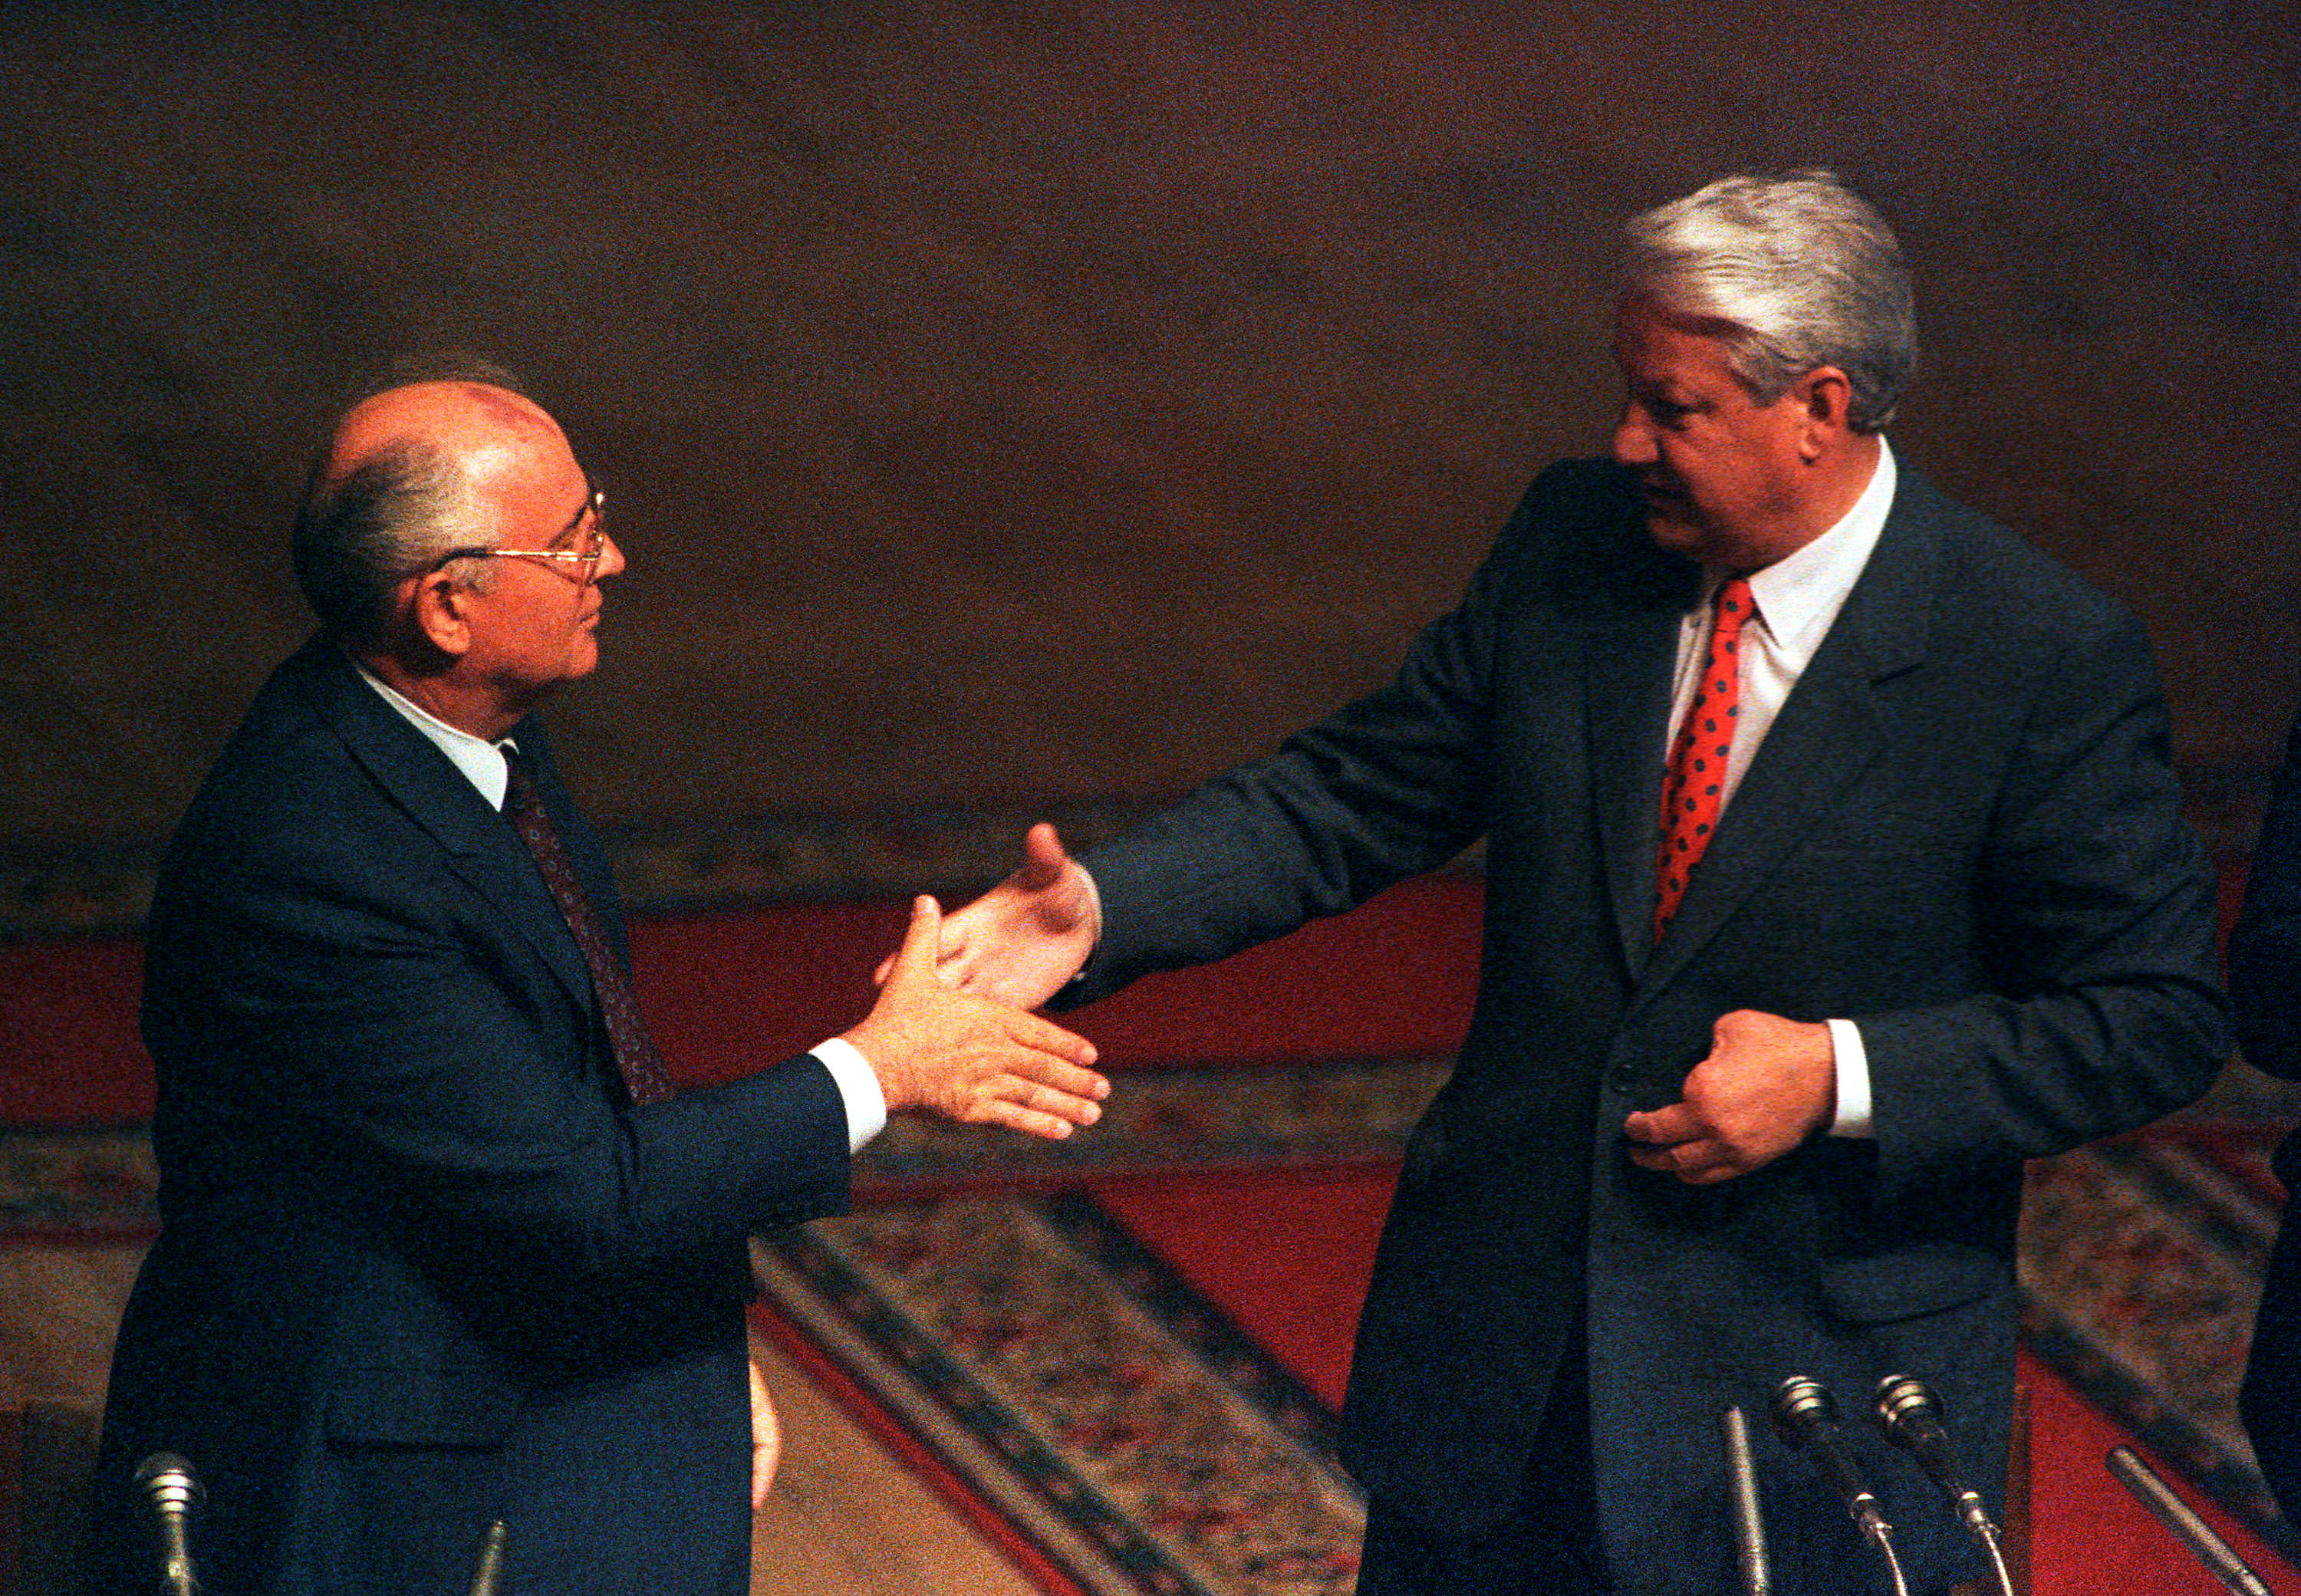 Soviet President Gorbachev shakes hands with Russian President Yeltsin in Russian Parliament